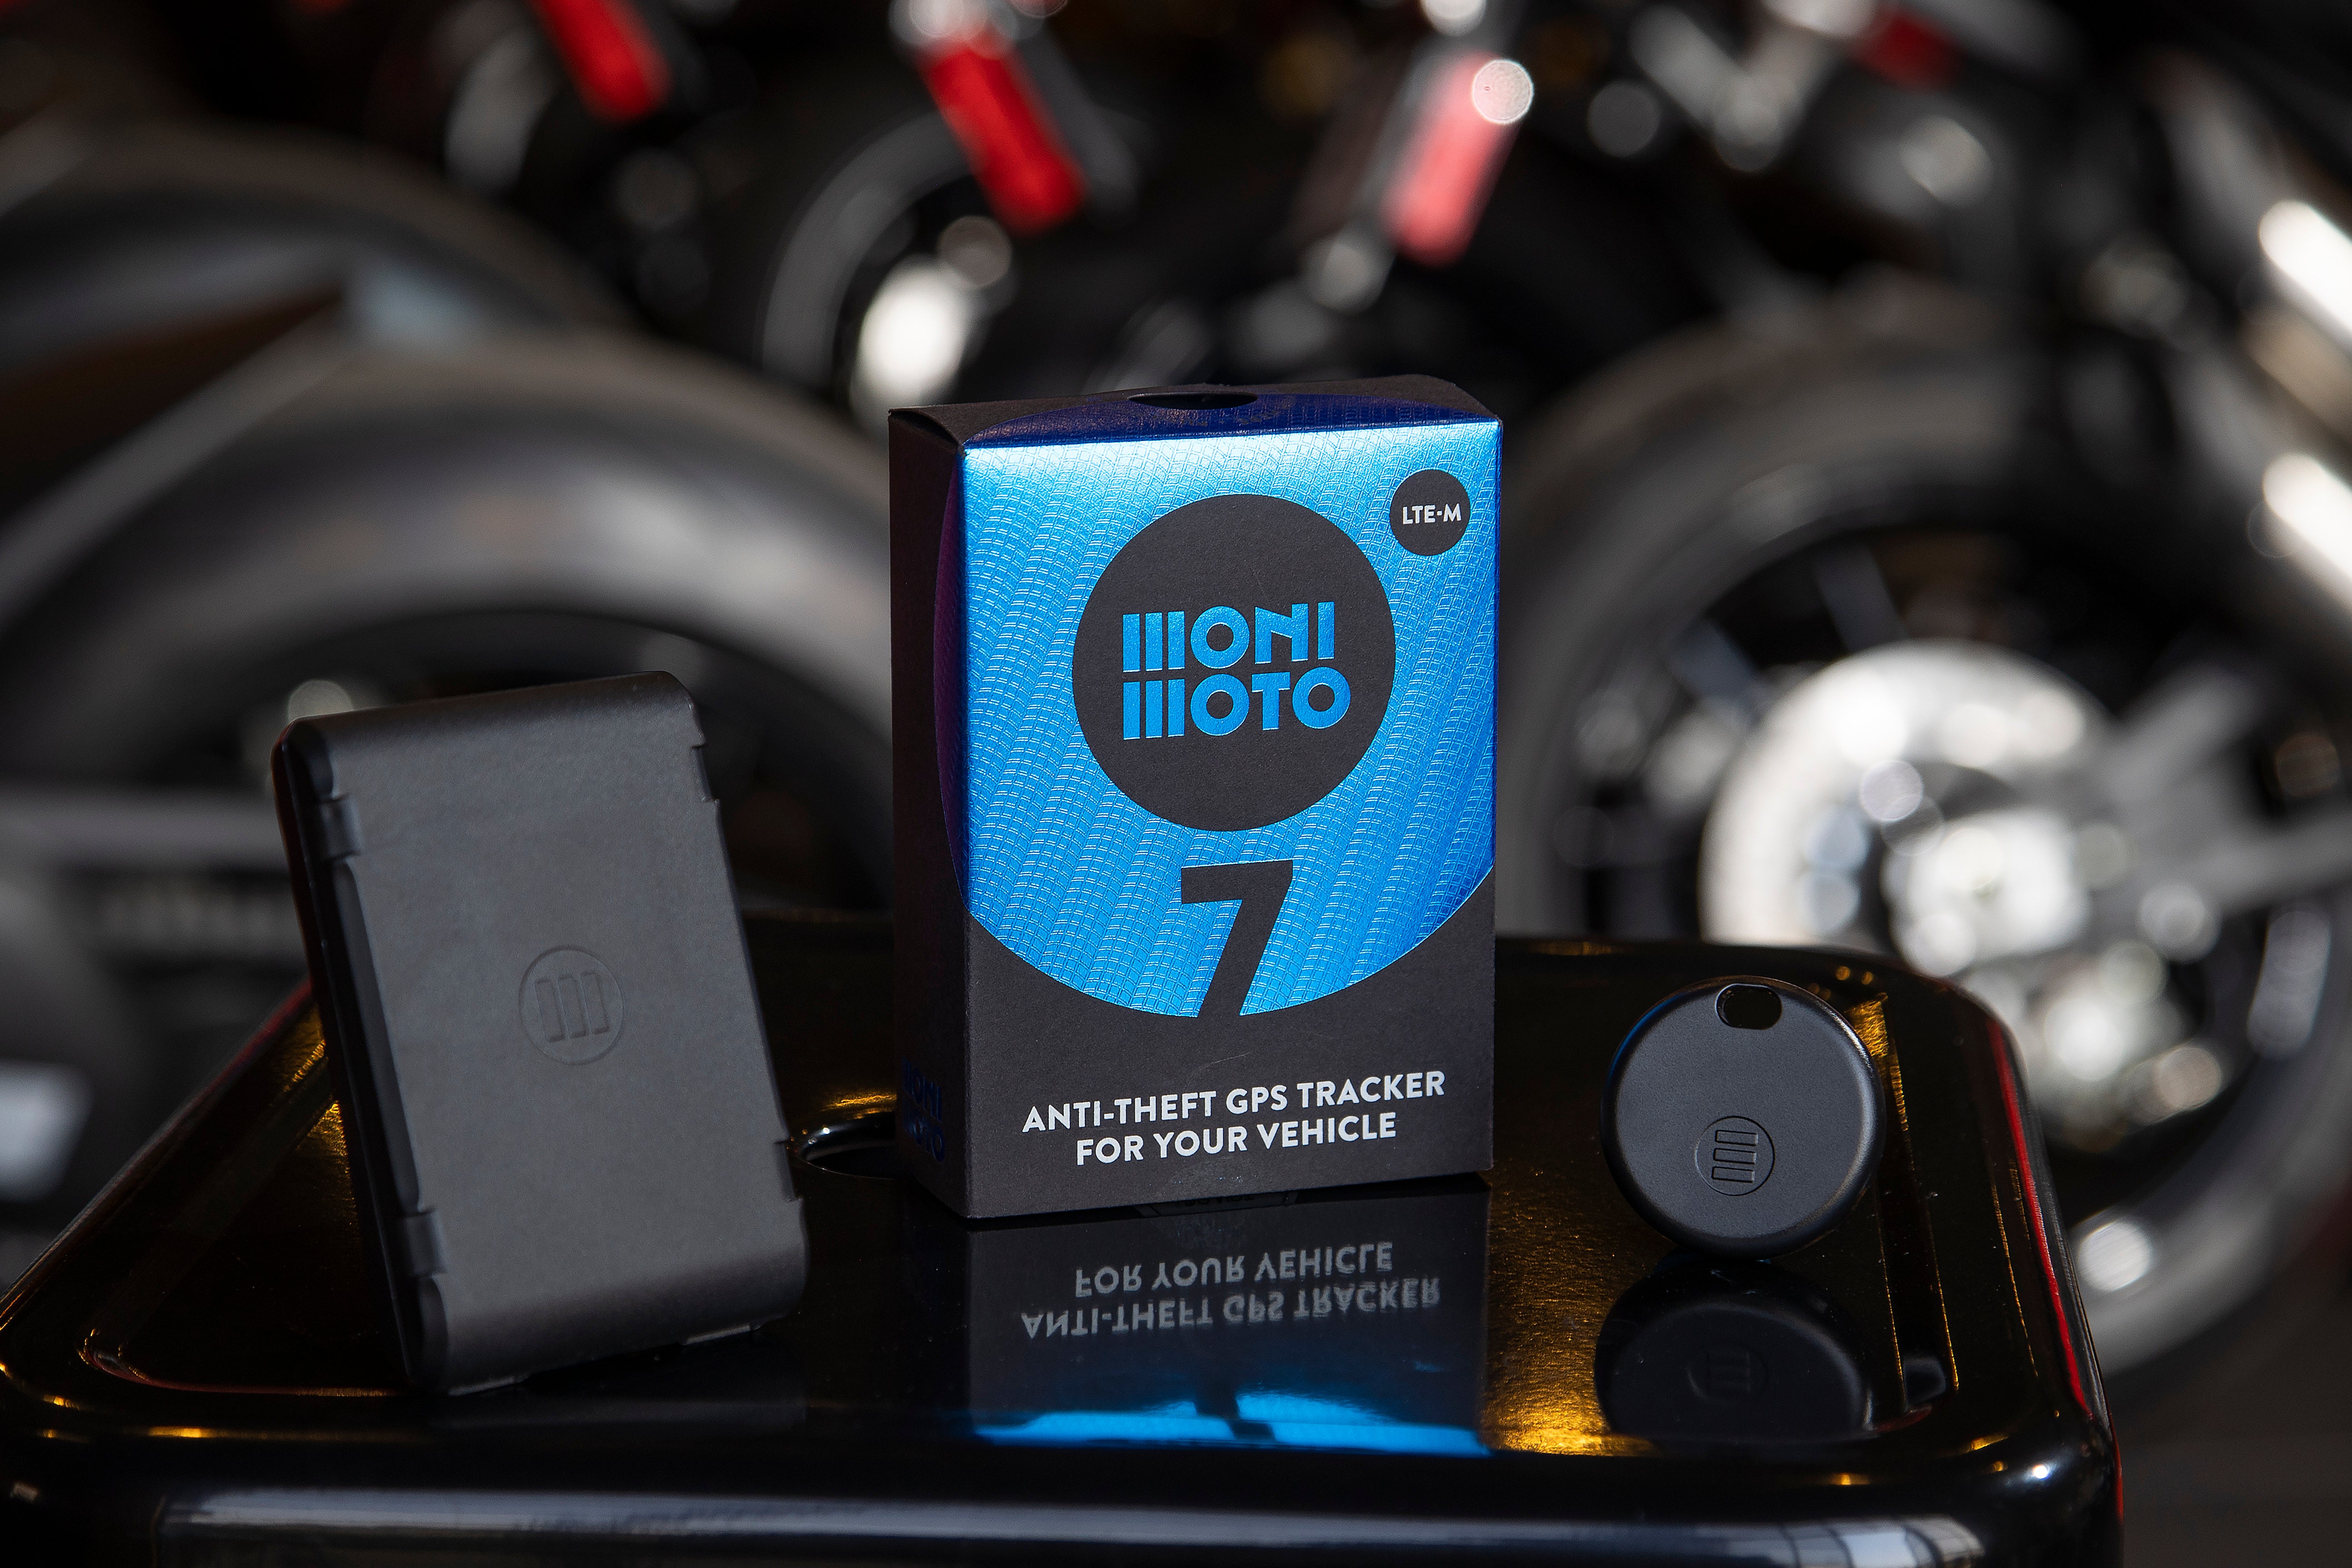 MoniMoto Motorcycle black and small GPS tracker places on the table with a motorcycle in a background